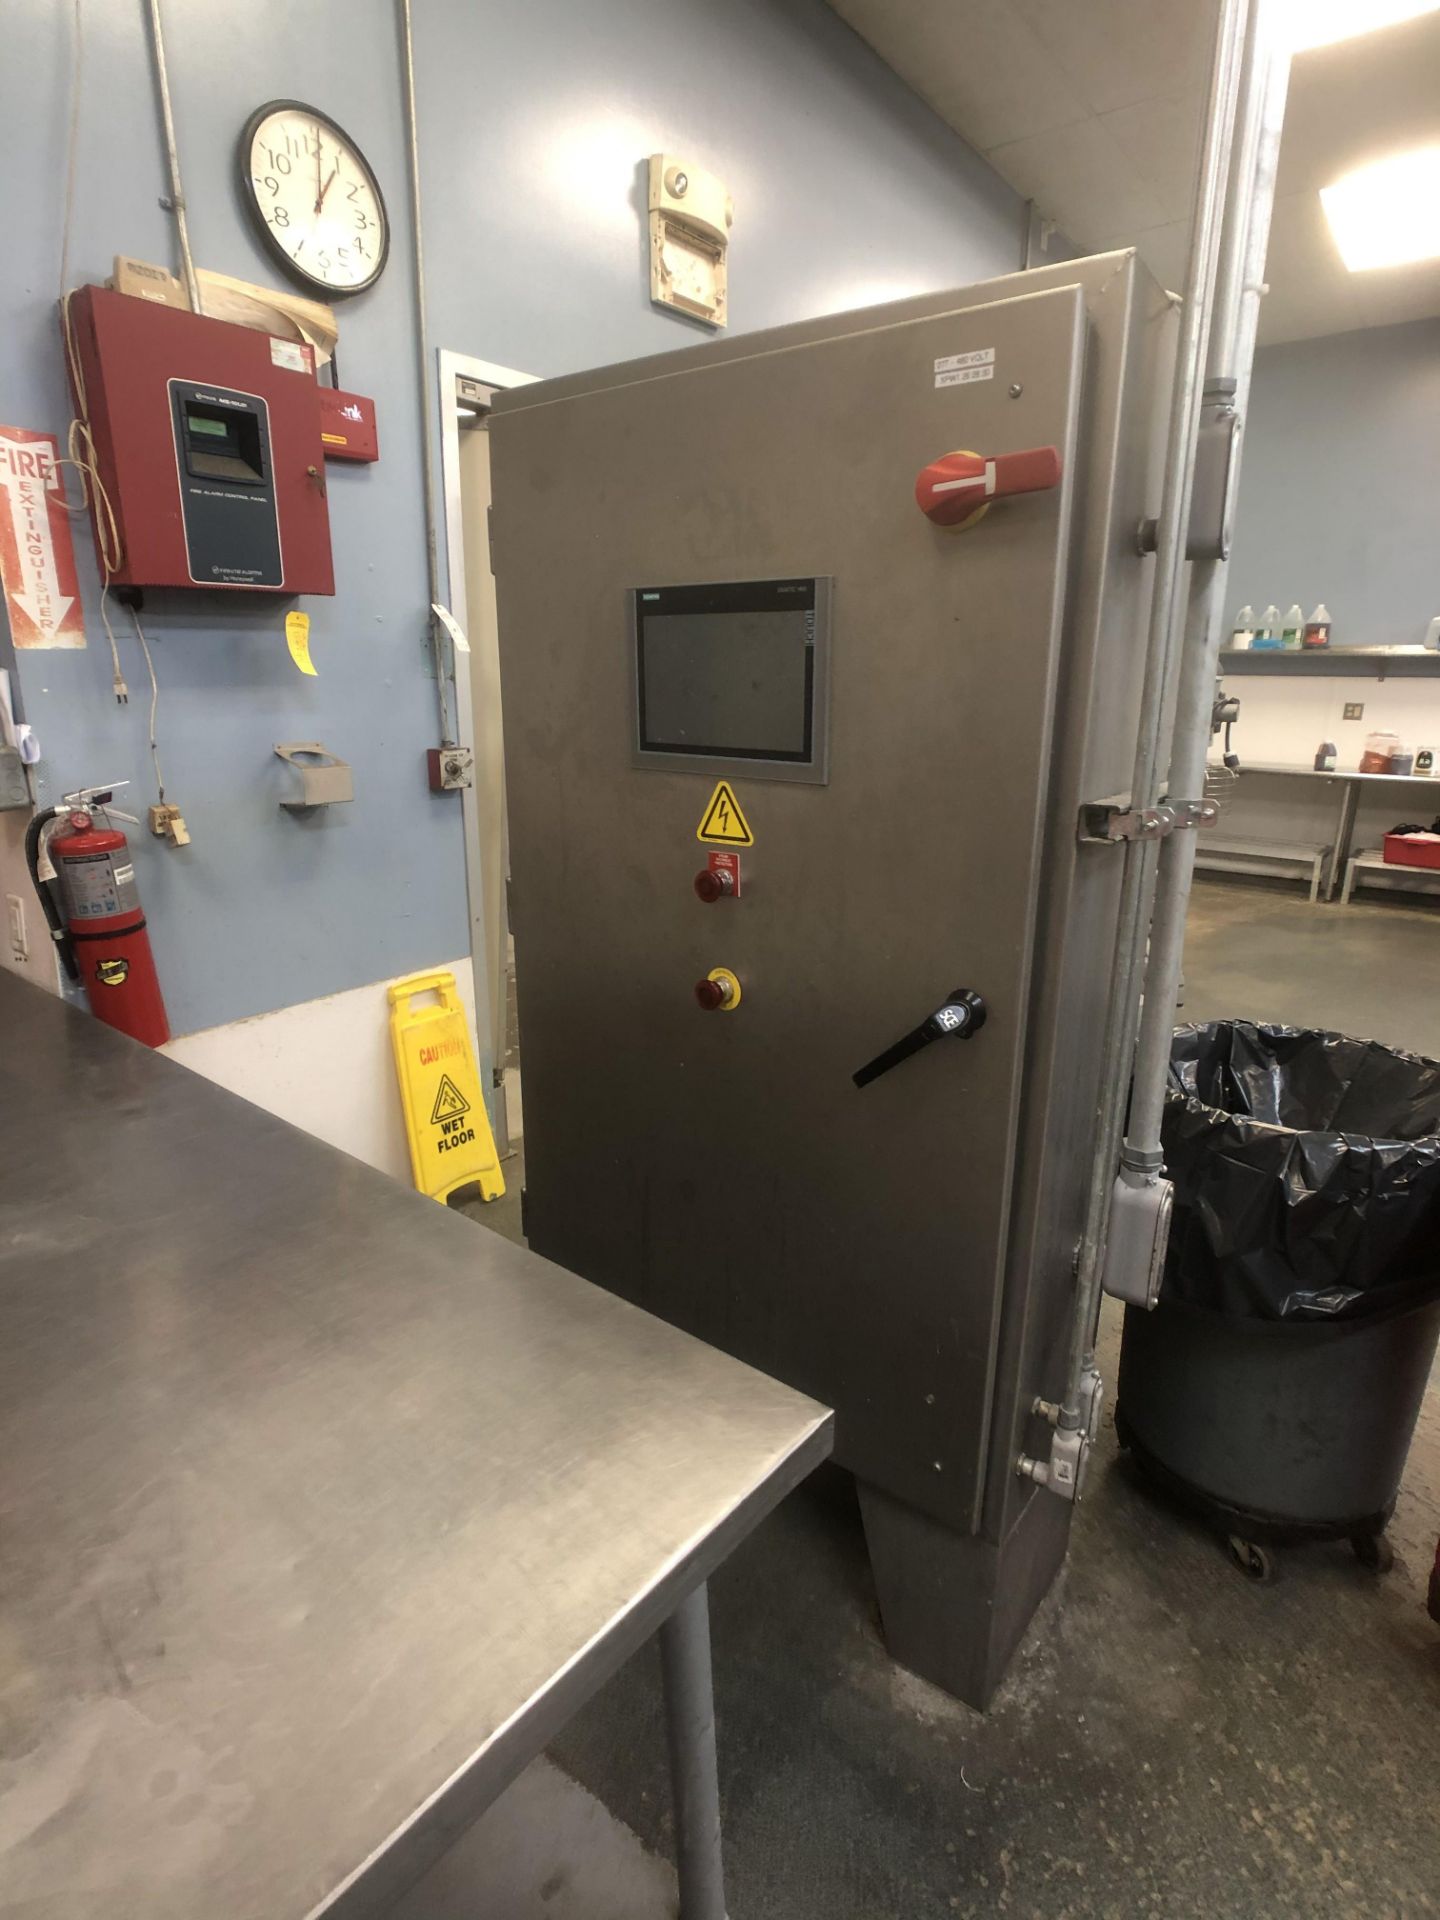 2019 Unitherm Food Systems 24" Flame Grill with Preheat, Model FG-24-8B-P, S/N FLGR-2485, Includes - Image 15 of 19